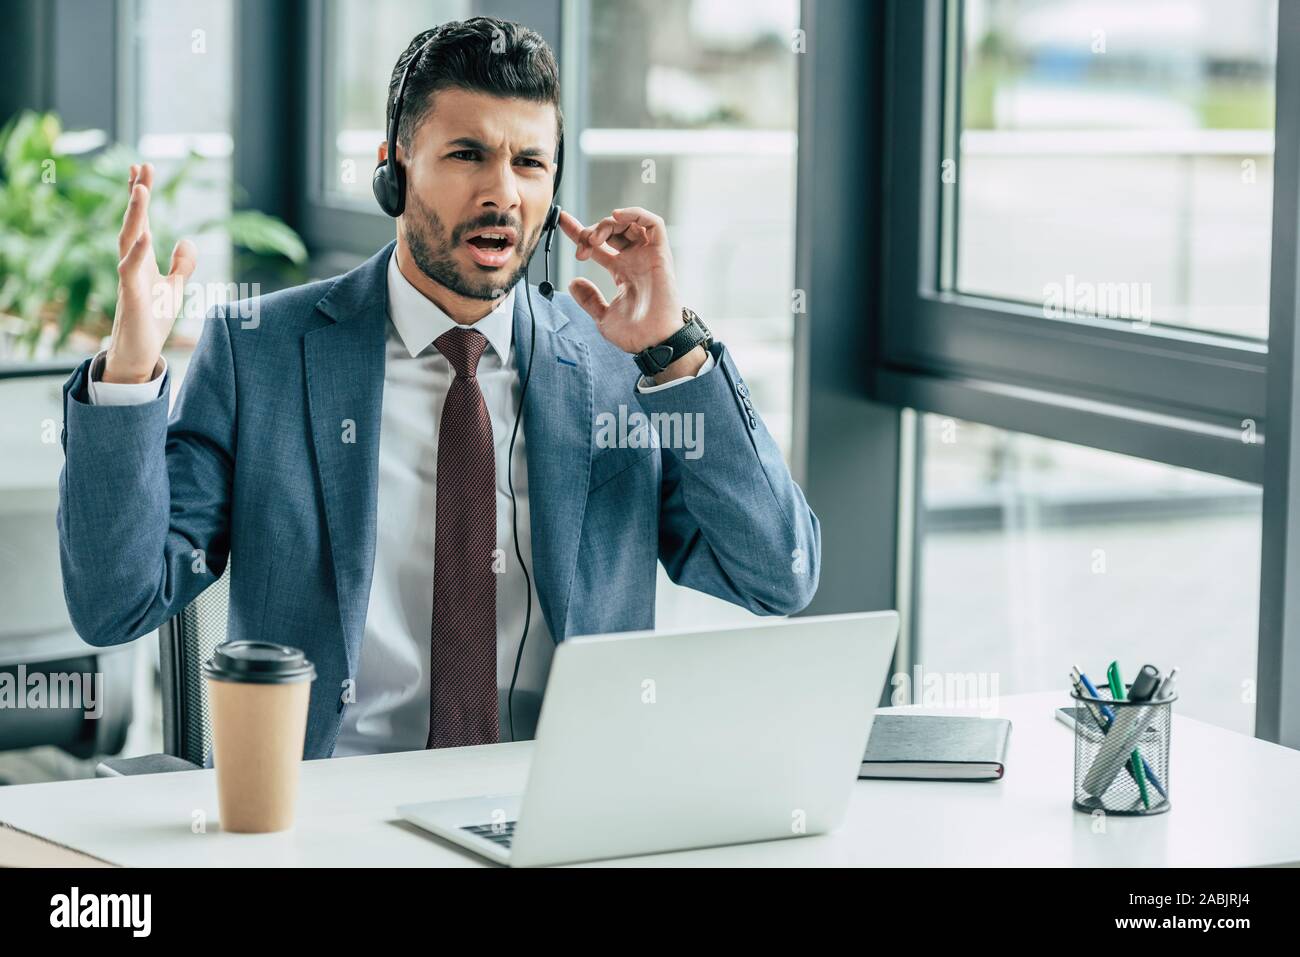 irritated call center operator in headset showing indignation gesture Stock Photo